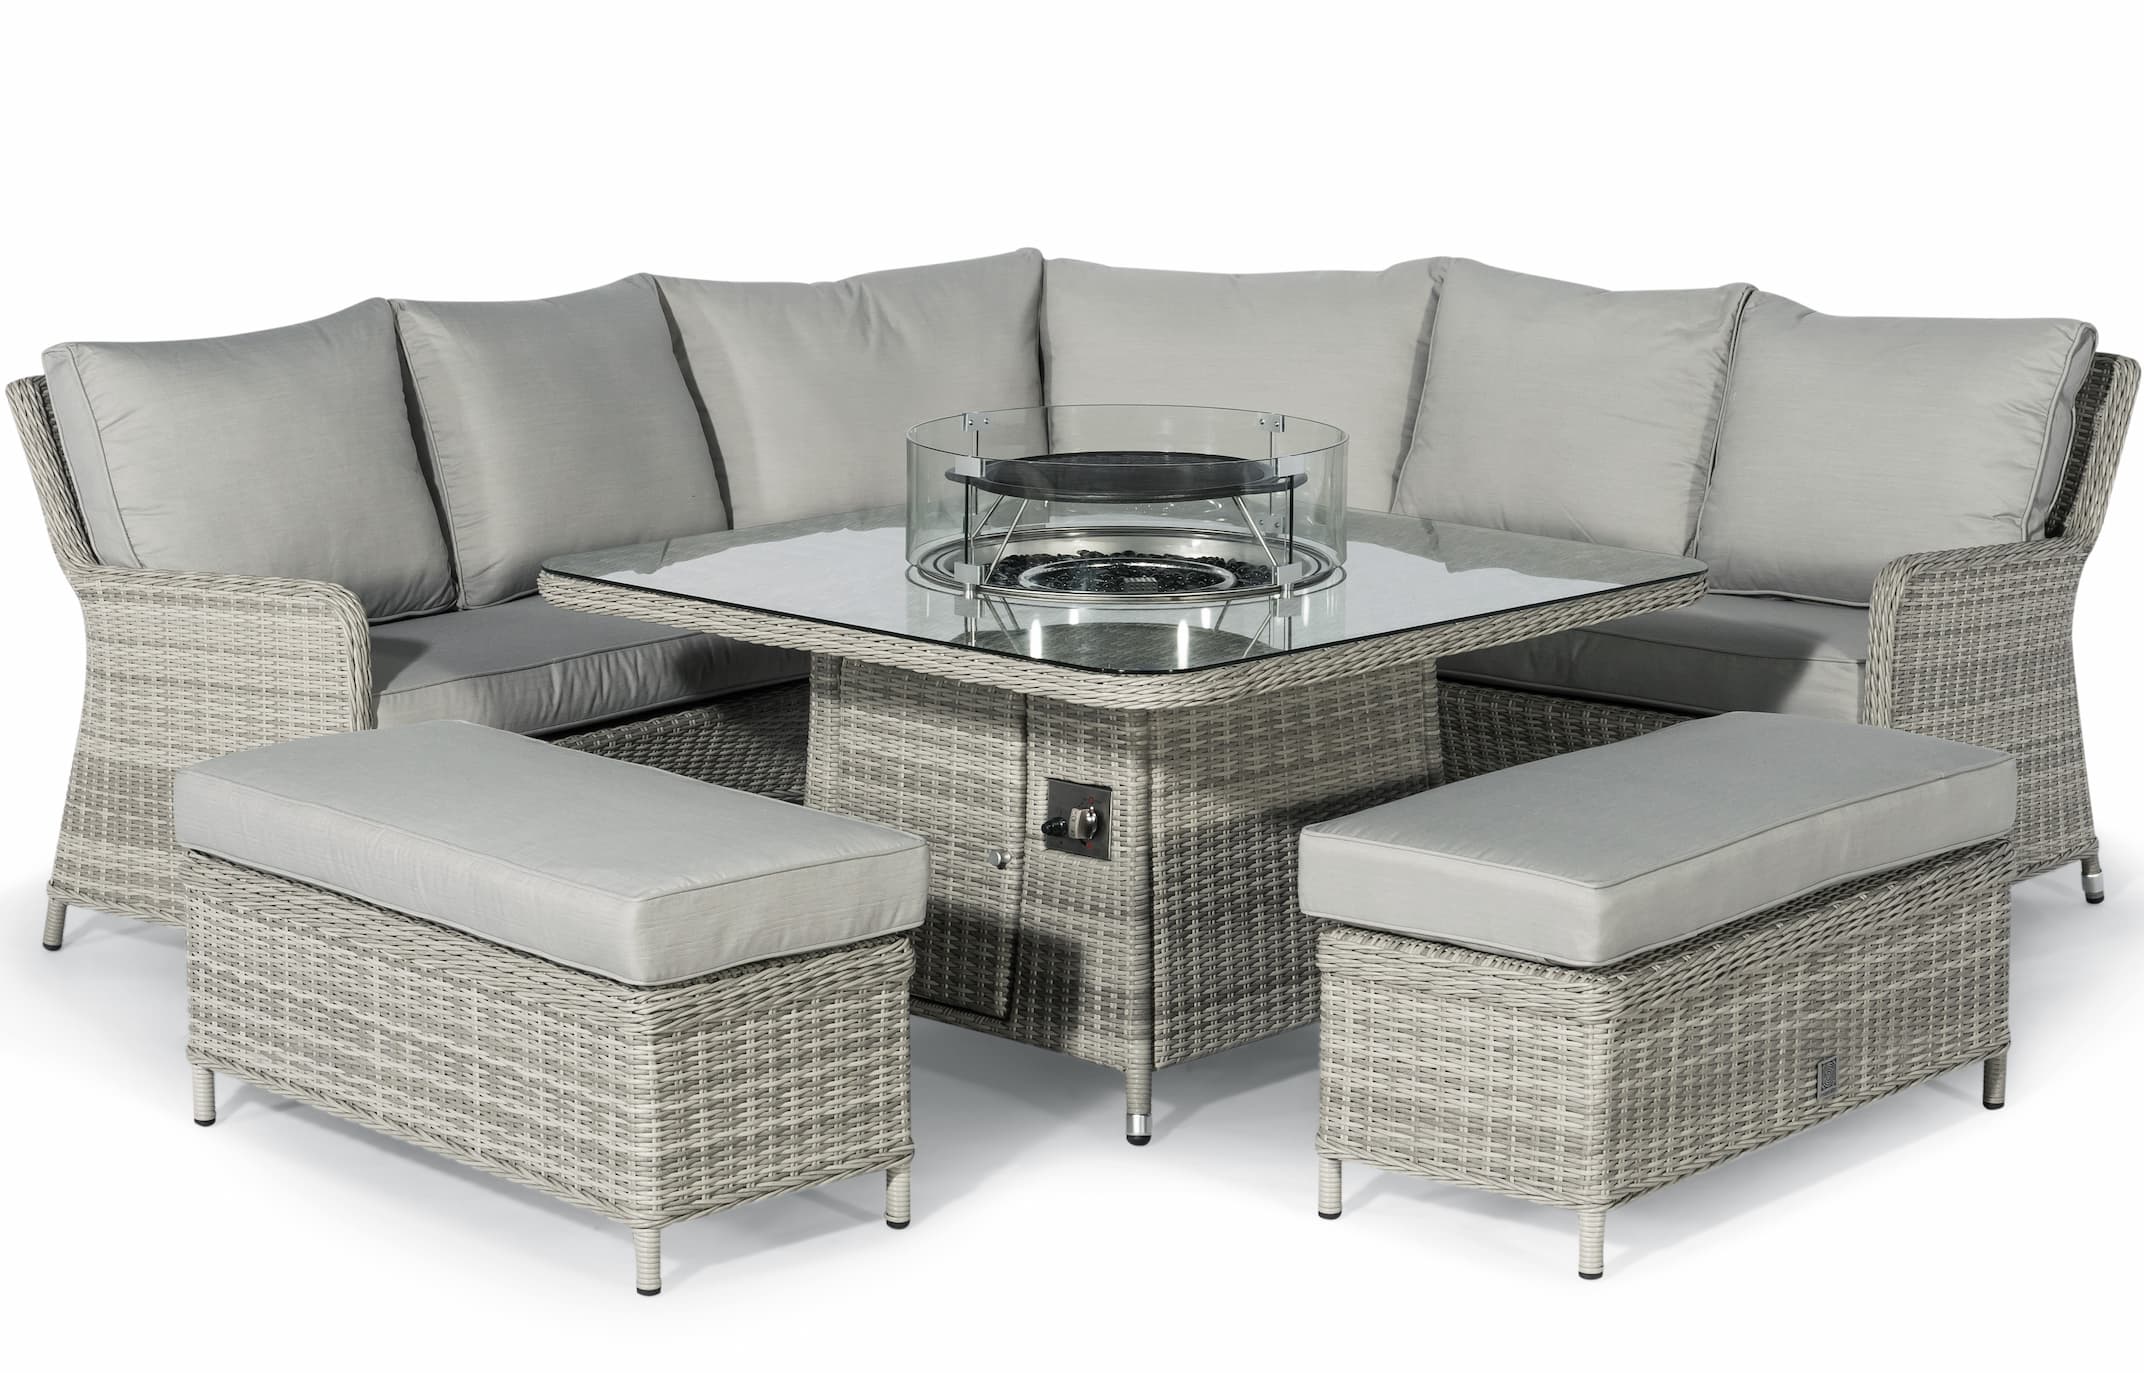 Royal Corner Garden Furniture Set With, Outdoor Furniture Set With Fire Pit